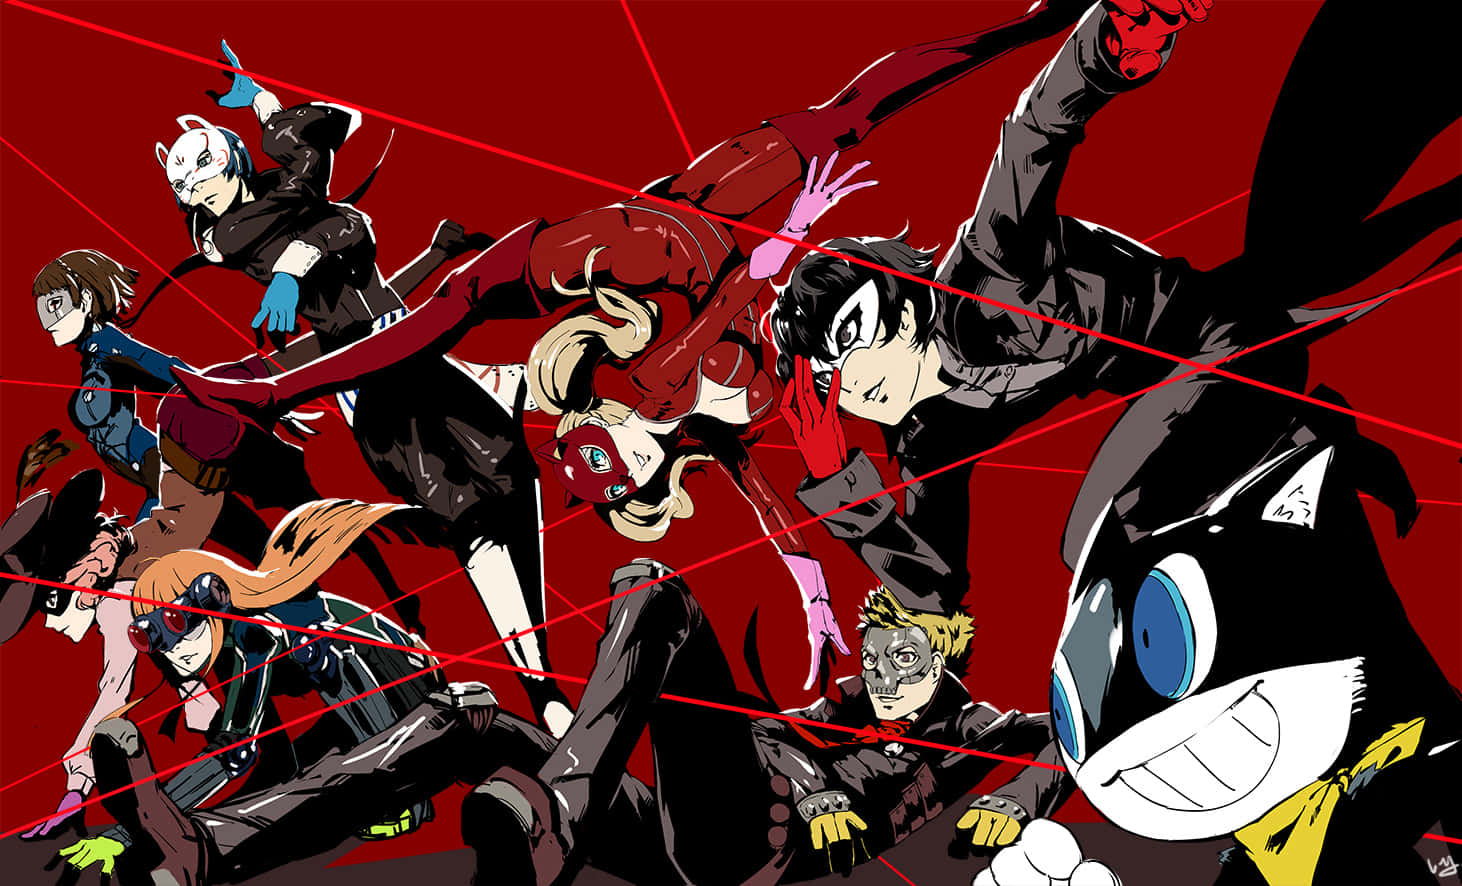 Queue up to join the Phantom Thieves in Persona 5